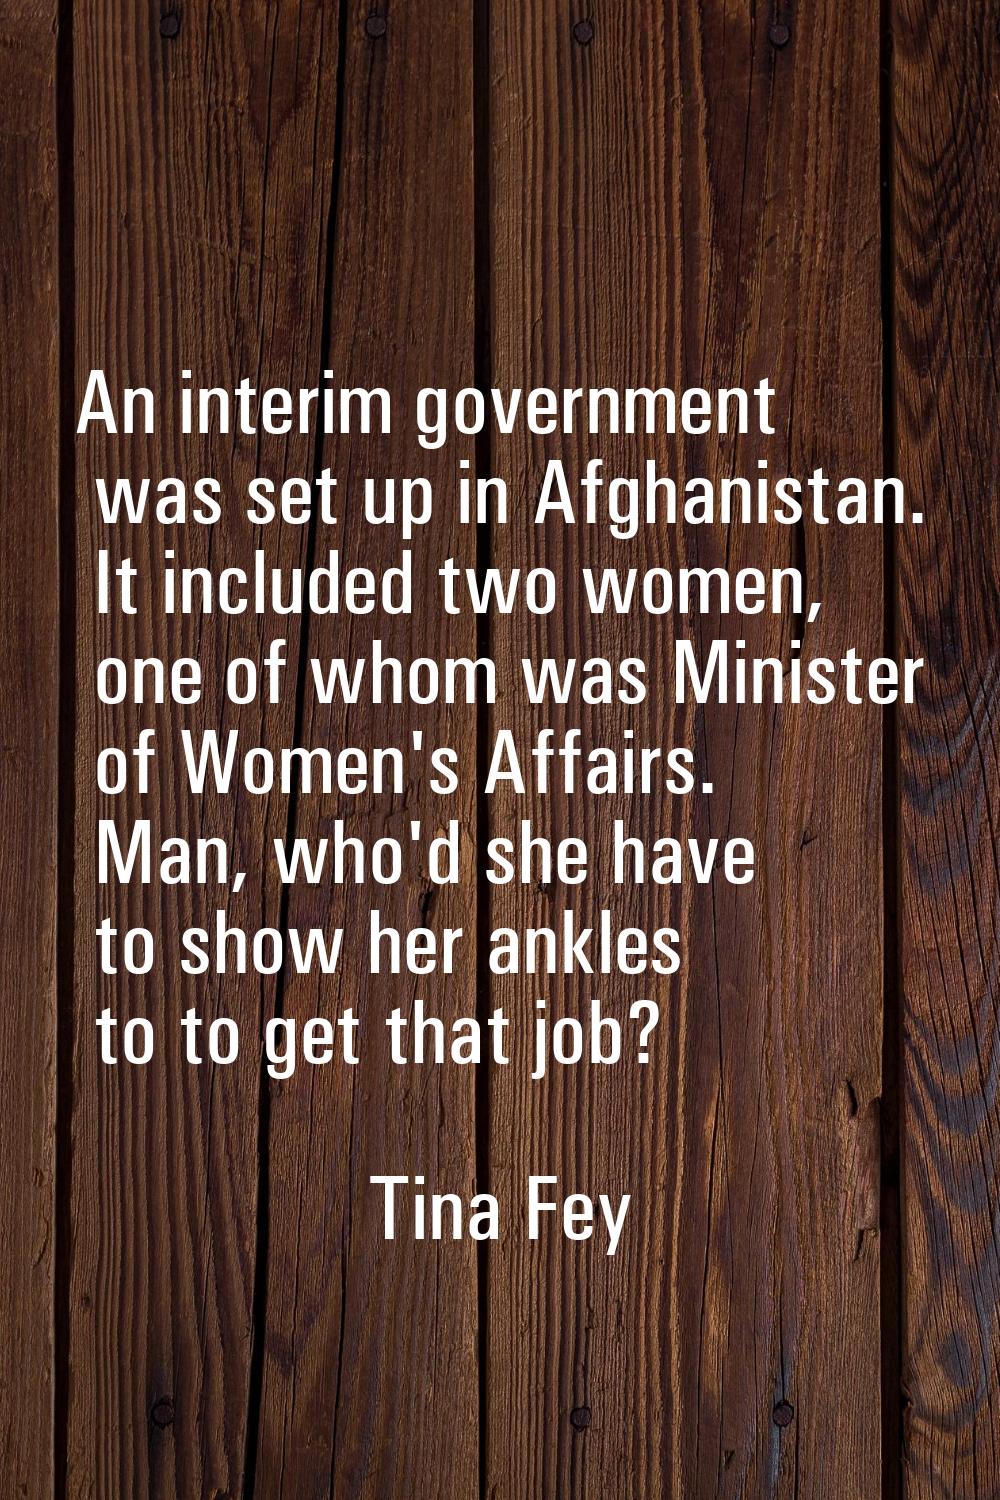 An interim government was set up in Afghanistan. It included two women, one of whom was Minister of